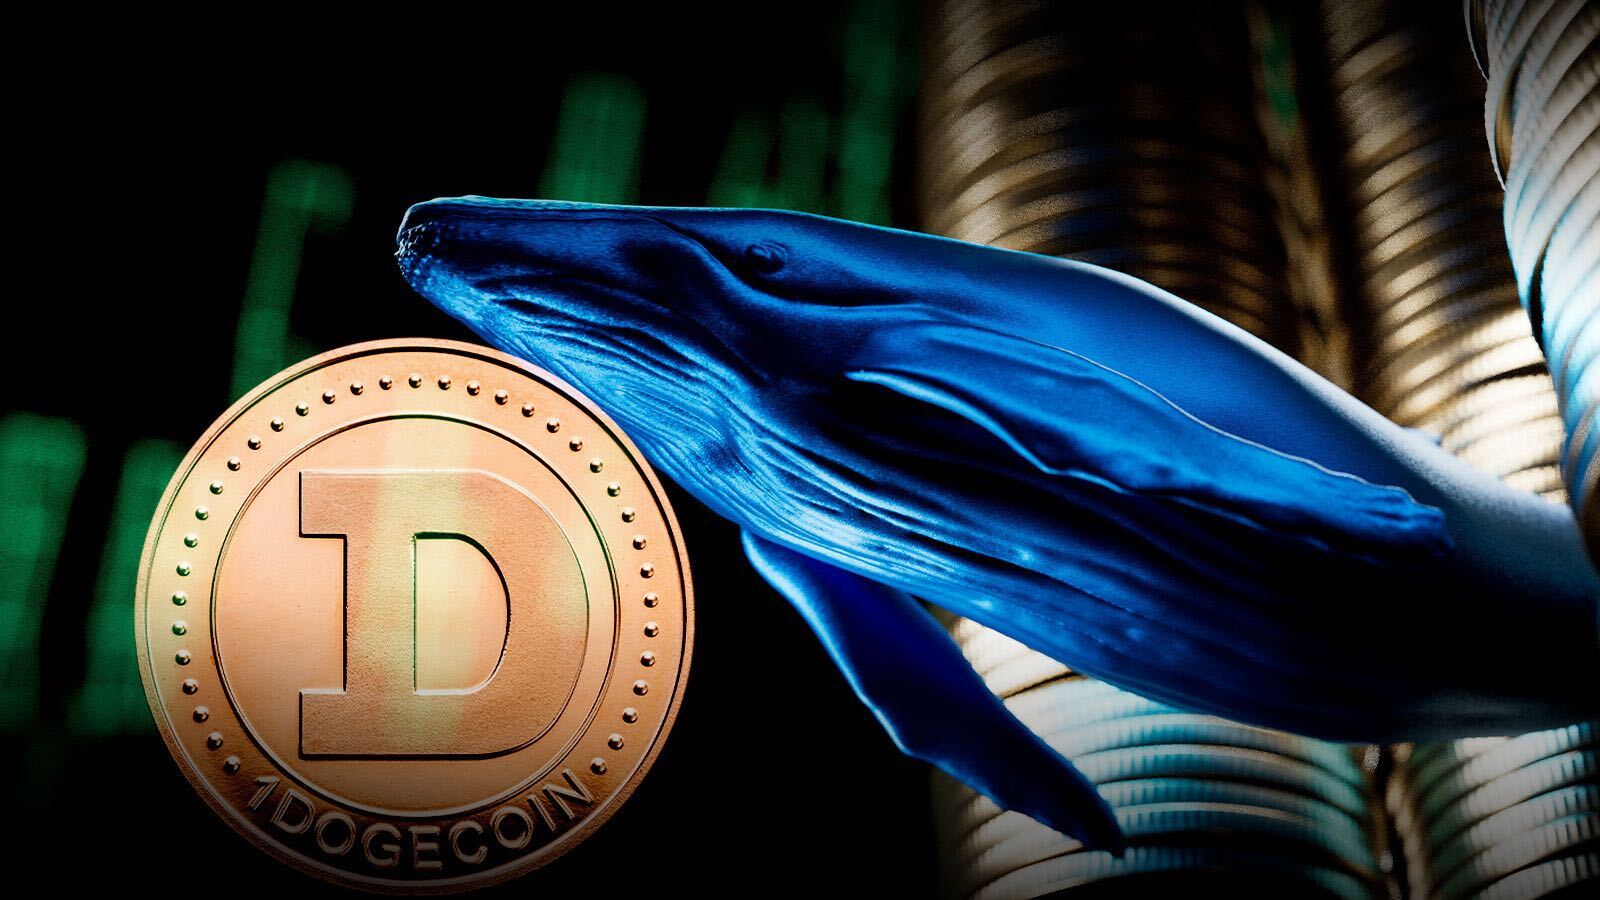 Dogecoin Catches Whales Interest, DOGE Is In Top 10 by Trading Volume